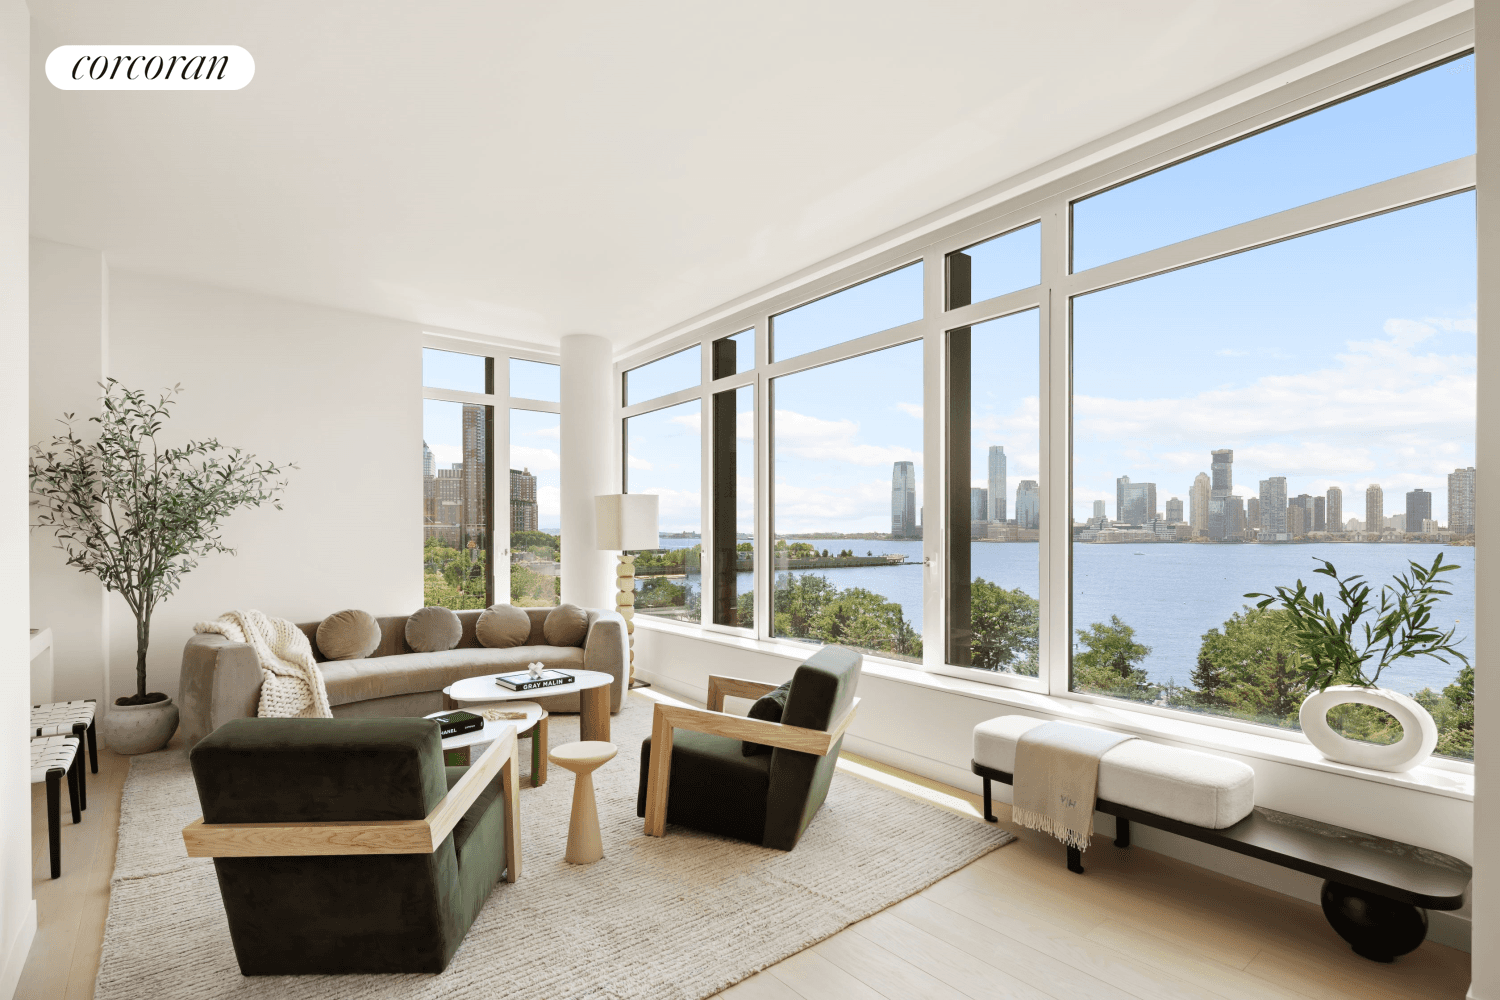 IMMEDIATE OCCUPANCY450 WASHINGTON RESIDENCES BY RELATED ON THE TRIBECA WATERFRONT.